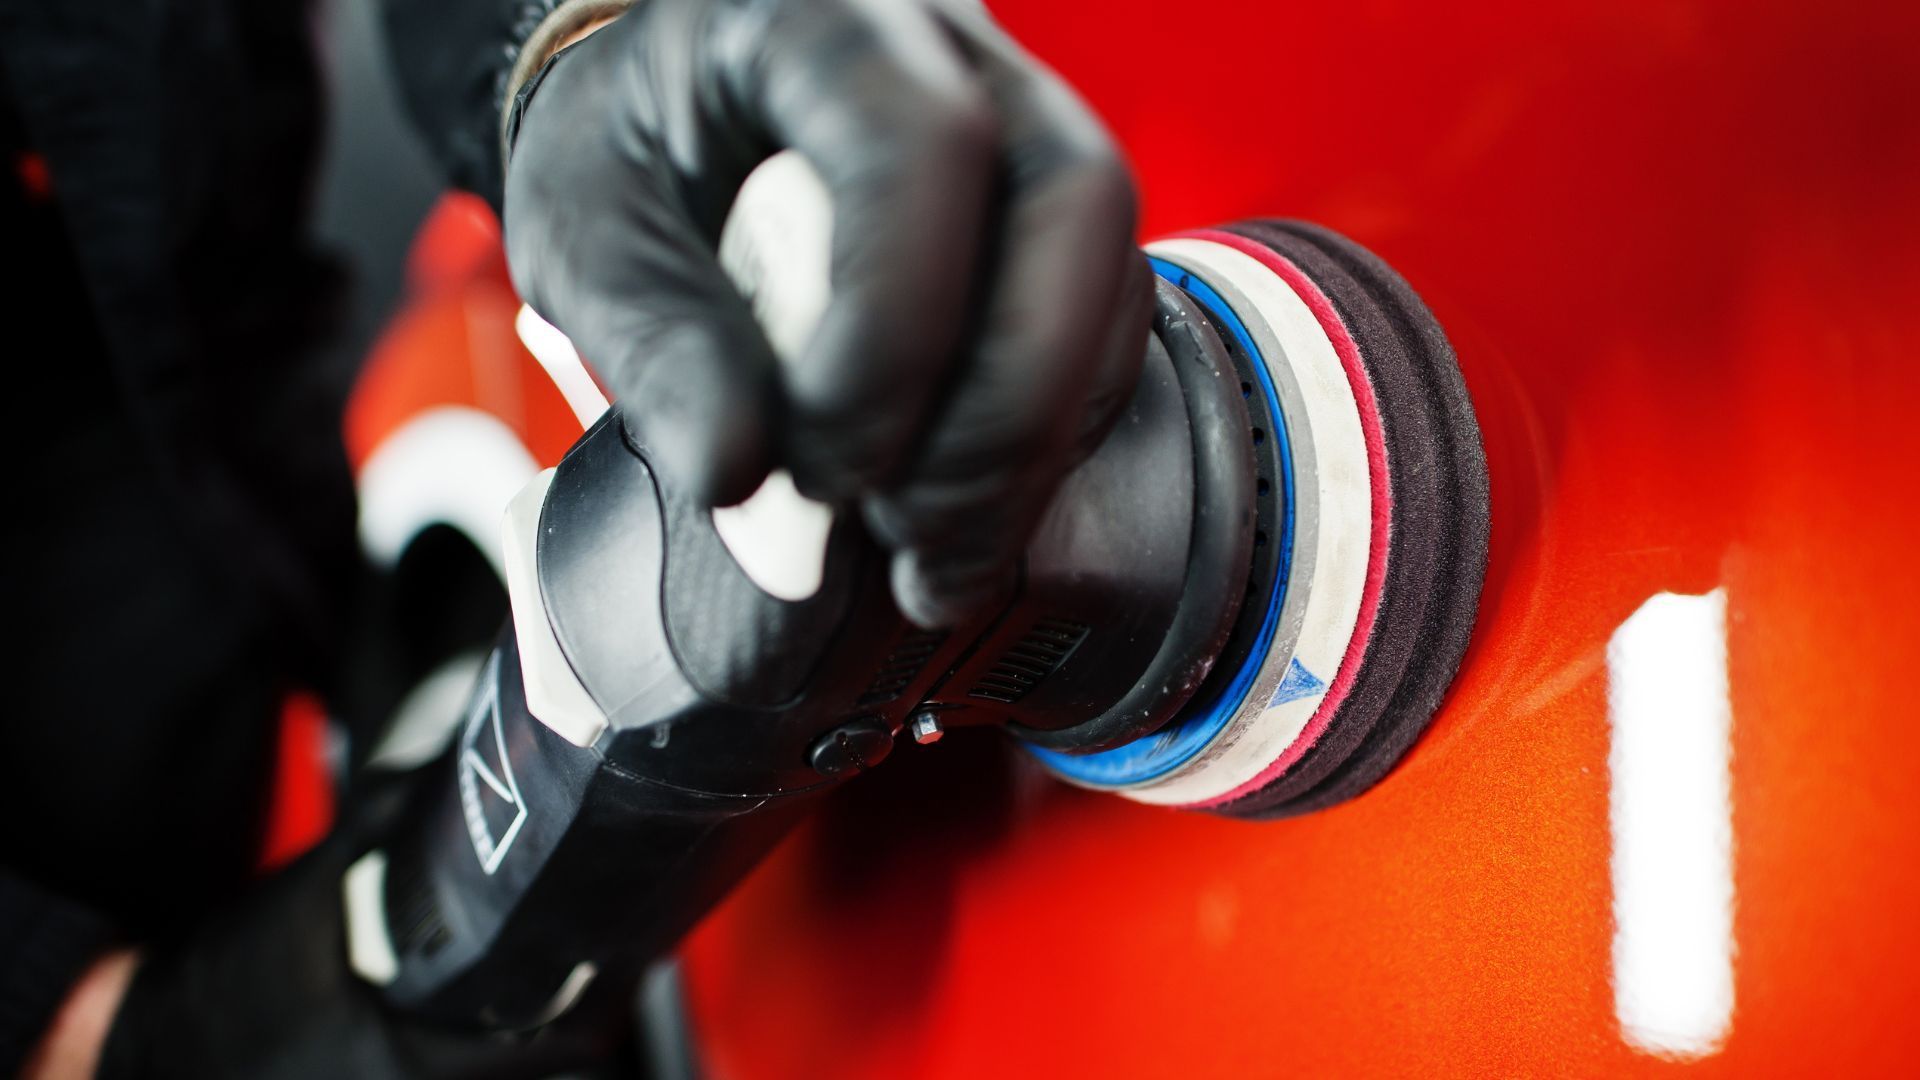 Close-up photo of a professional detailer in Duluth, GA, polishing a vibrant red car using a modern electric buffer. The detailer, wearing black gloves, expertly manipulates the buffer to achieve a high gloss finish. The focus is on the detailer's hands and the tool, emphasizing the shine and precision involved in the car detailing process, with reflections visible on the smooth, shiny surface of the car.